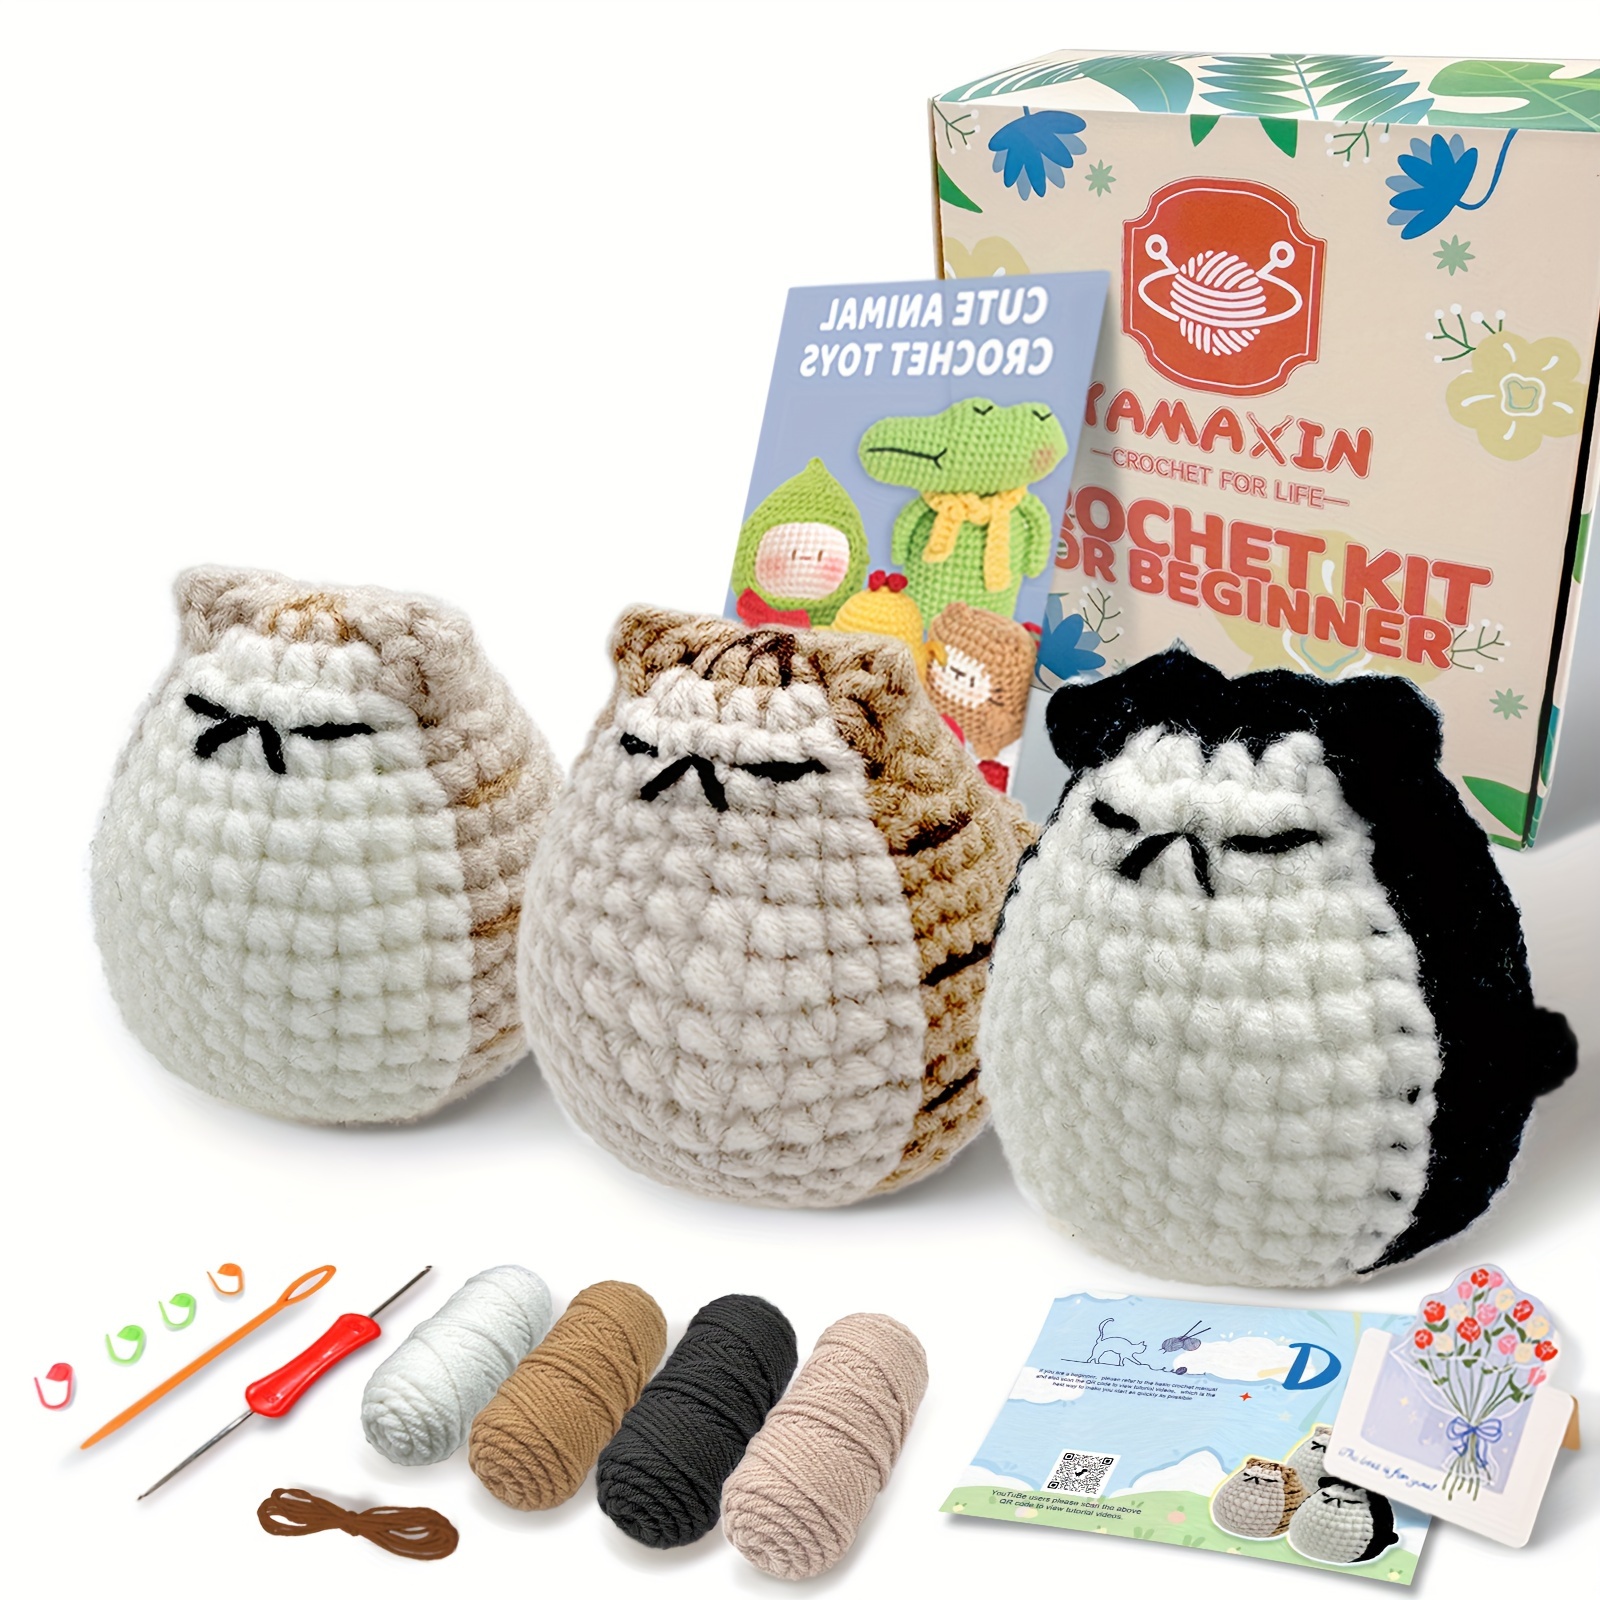 

3pcs, Cats Crochet Kits For Beginners, Starter Crochet Kit All-in-one Complete Crochet Kit Learn To Crochet Sets With Instructions And Step By Step Video Tutorials For Adults